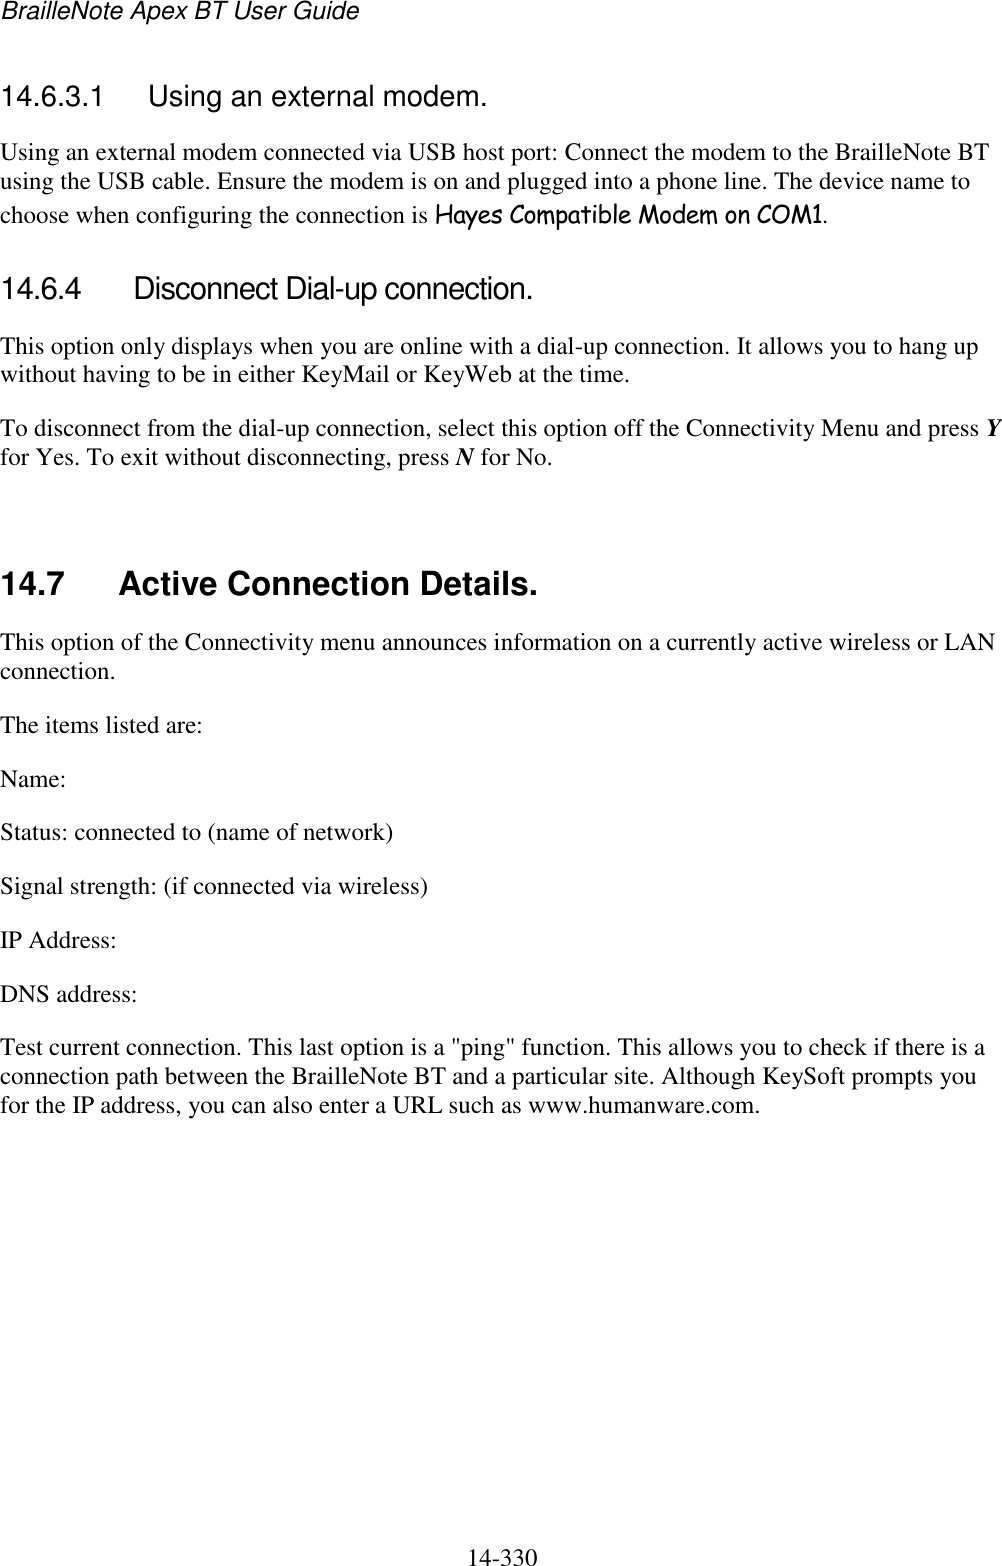 BrailleNote Apex BT User Guide   14-330   14.6.3.1  Using an external modem. Using an external modem connected via USB host port: Connect the modem to the BrailleNote BT using the USB cable. Ensure the modem is on and plugged into a phone line. The device name to choose when configuring the connection is Hayes Compatible Modem on COM1.  14.6.4  Disconnect Dial-up connection. This option only displays when you are online with a dial-up connection. It allows you to hang up without having to be in either KeyMail or KeyWeb at the time. To disconnect from the dial-up connection, select this option off the Connectivity Menu and press Y for Yes. To exit without disconnecting, press N for No.   14.7  Active Connection Details. This option of the Connectivity menu announces information on a currently active wireless or LAN connection. The items listed are: Name: Status: connected to (name of network) Signal strength: (if connected via wireless) IP Address: DNS address: Test current connection. This last option is a &quot;ping&quot; function. This allows you to check if there is a connection path between the BrailleNote BT and a particular site. Although KeySoft prompts you for the IP address, you can also enter a URL such as www.humanware.com.   